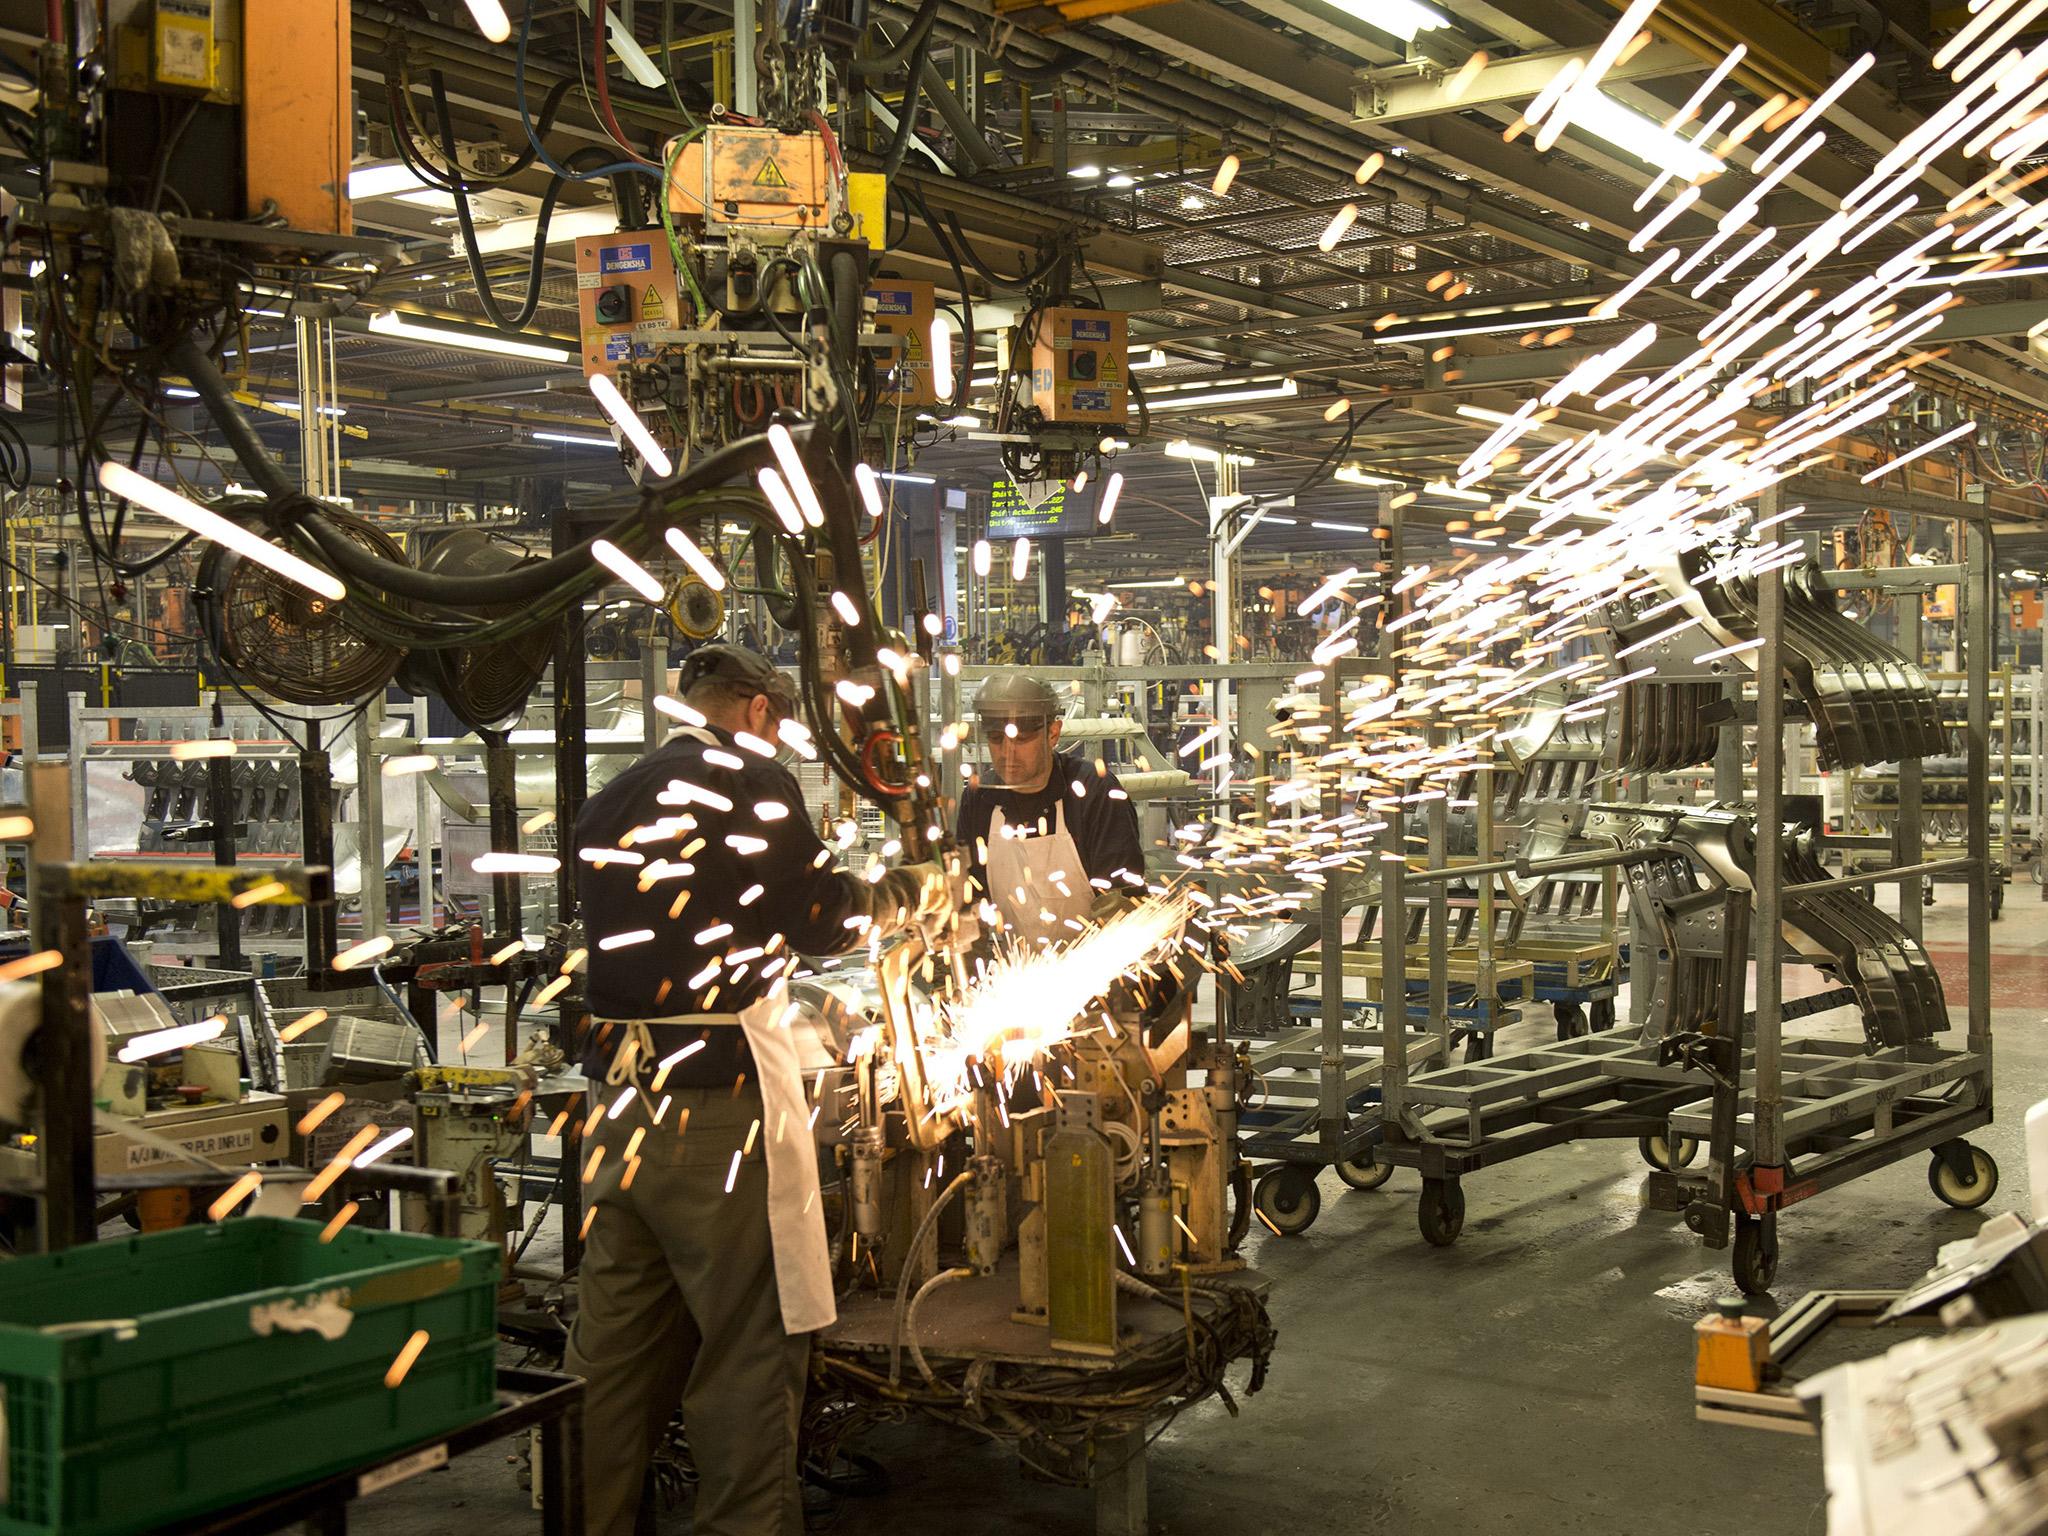 Manufacturing is expected to contribute to third quarter GDP growth